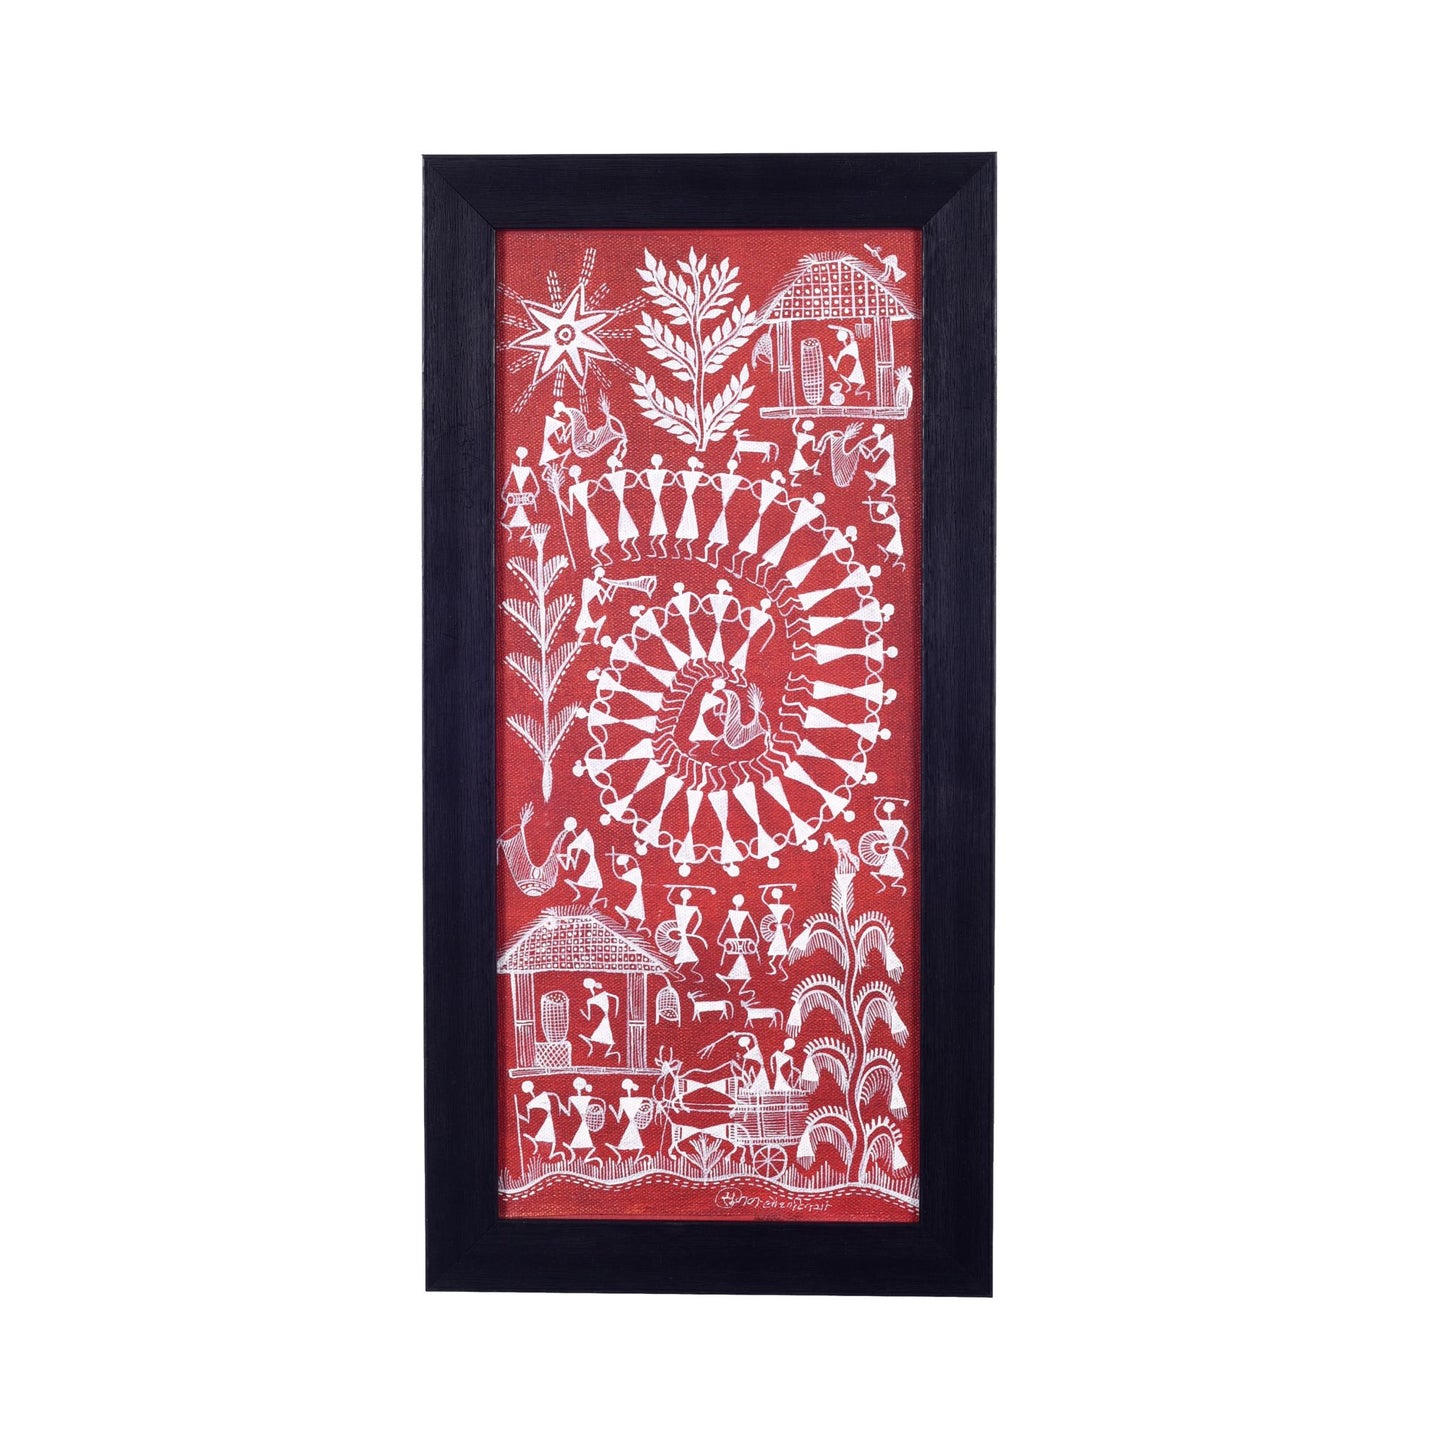 Warli Village Handcrafted Painting (9x0.5x18)